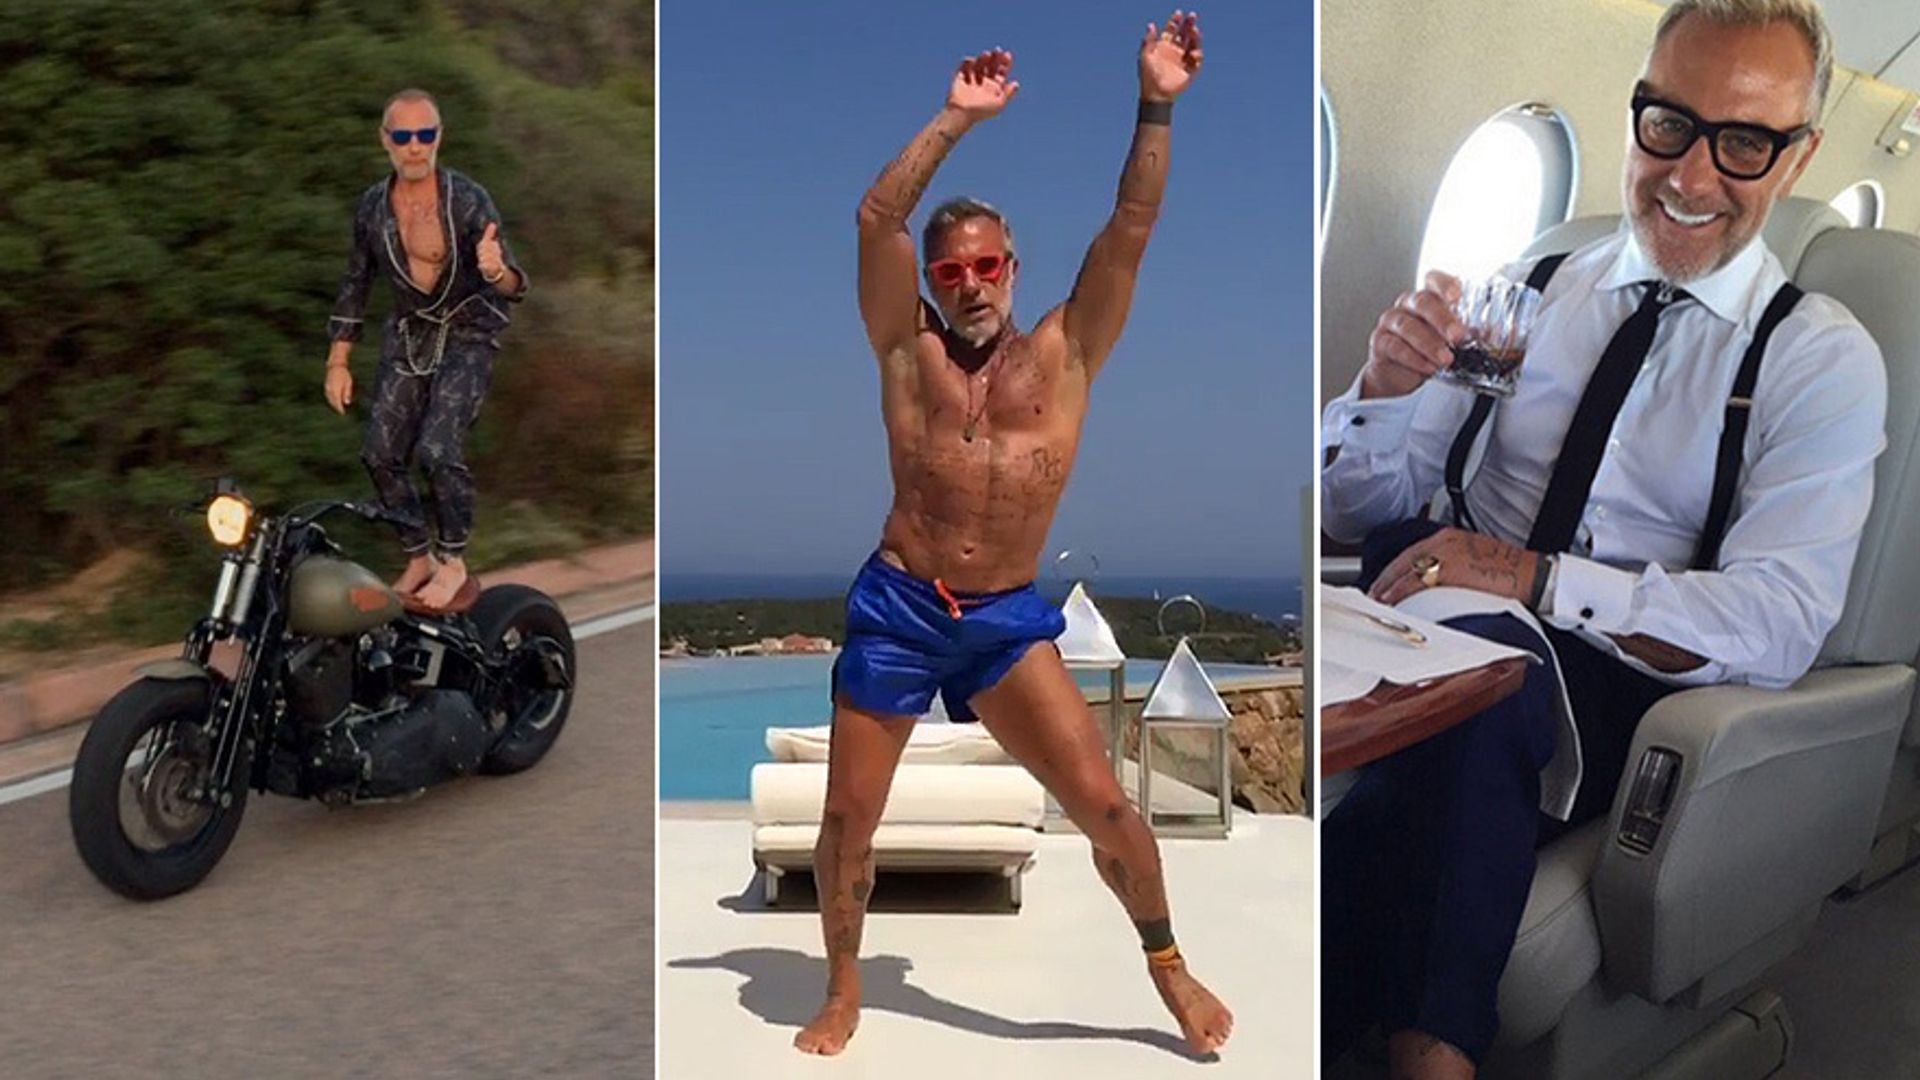 Everything you need to know about viral dancing star Gianluca Vacchi